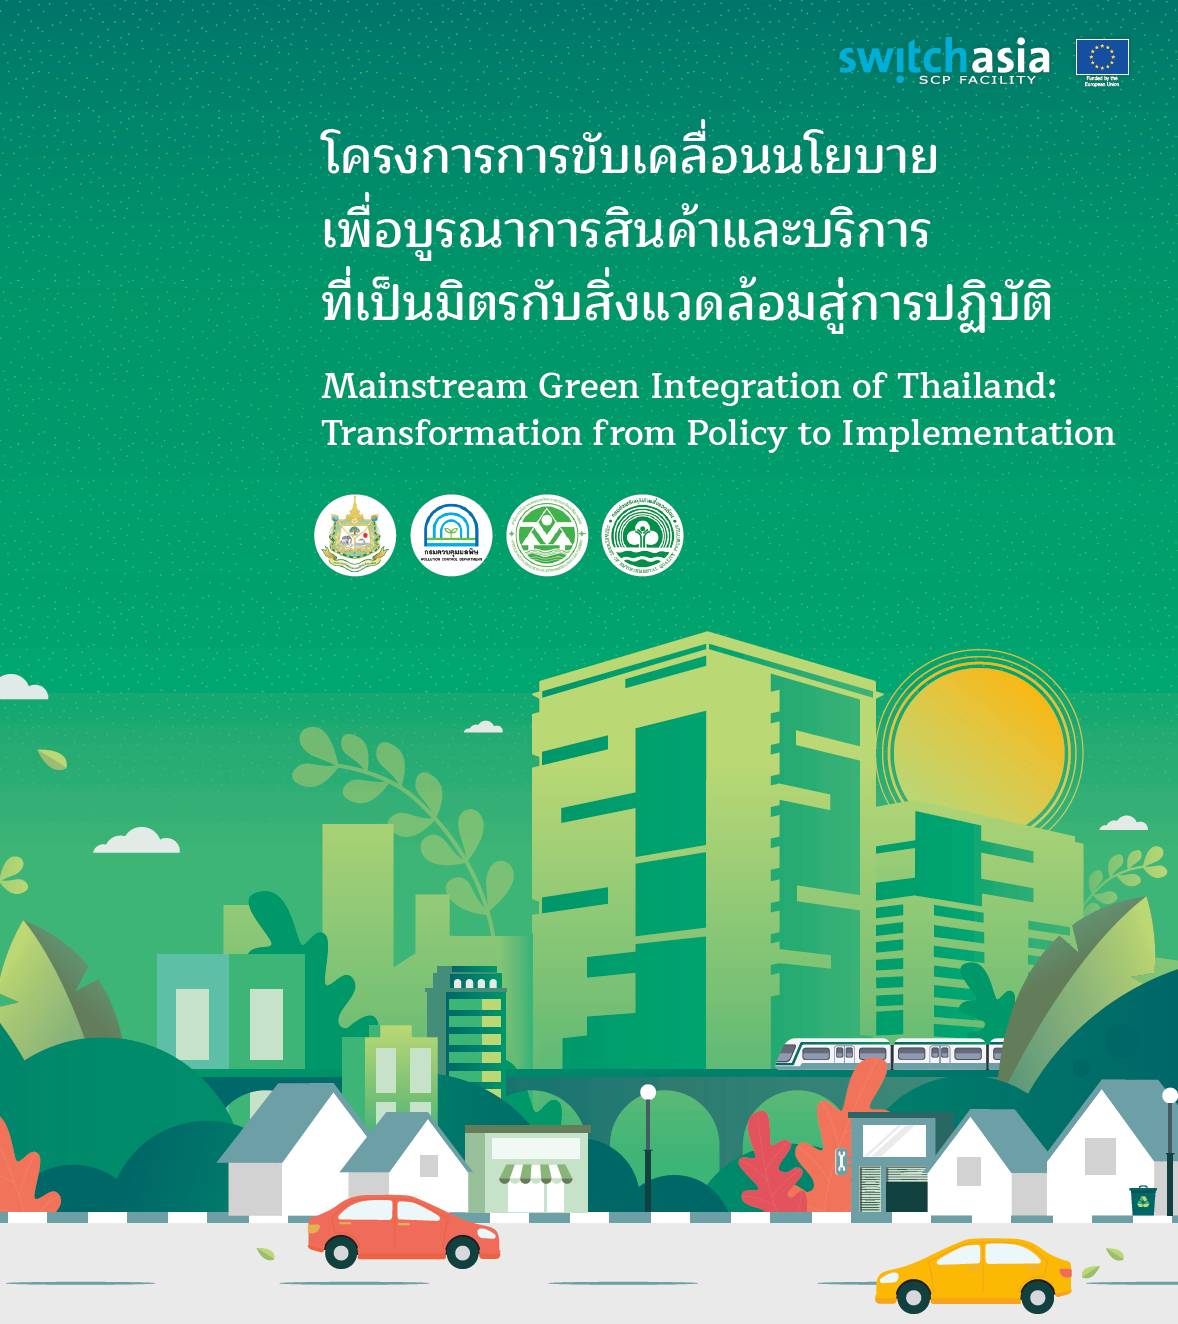 Mainstreaming Green Integration of Thailand: Transformation from Policy to Implementation (TH)